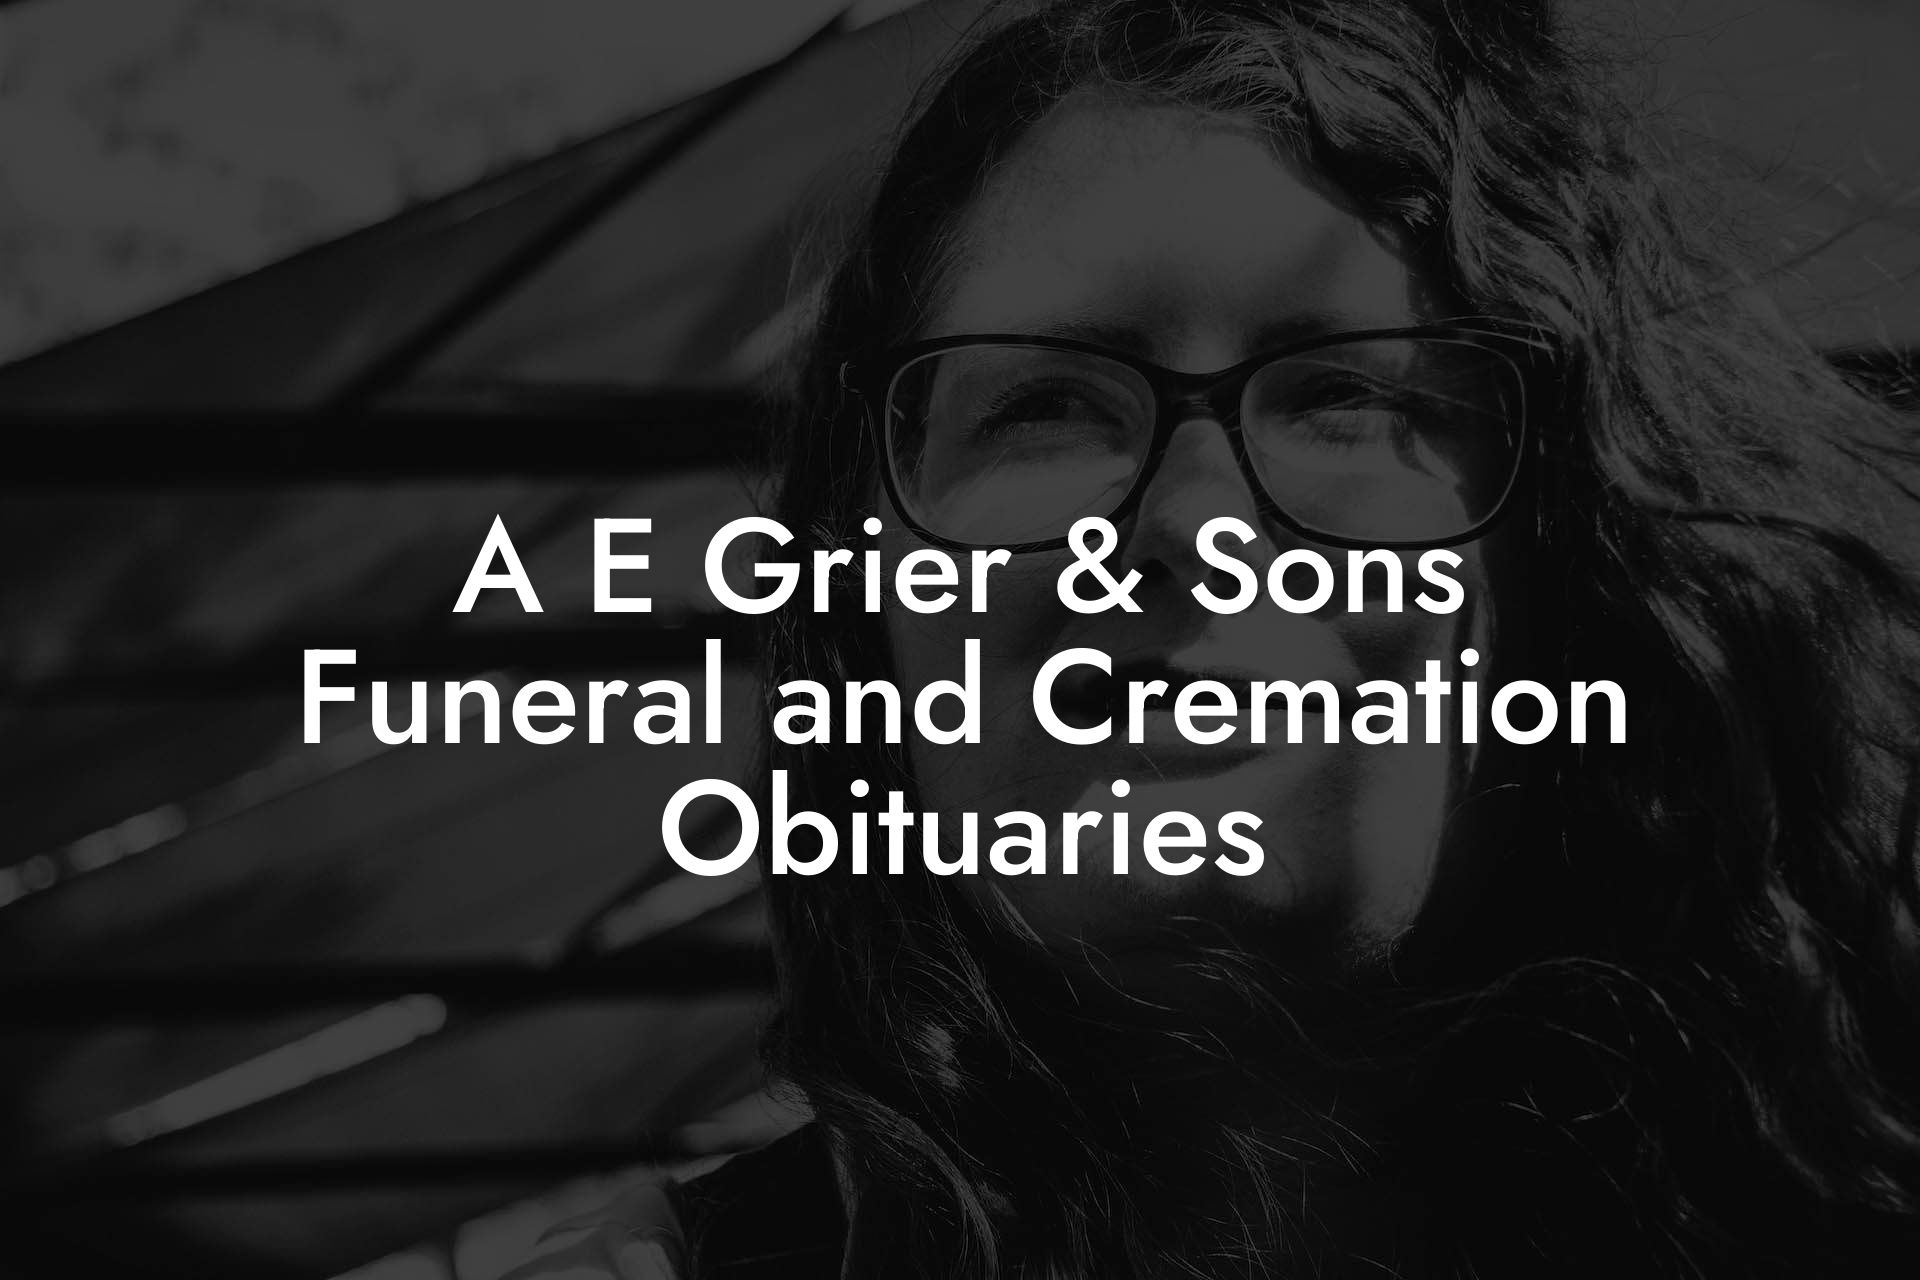 A E Grier & Sons Funeral and Cremation Obituaries